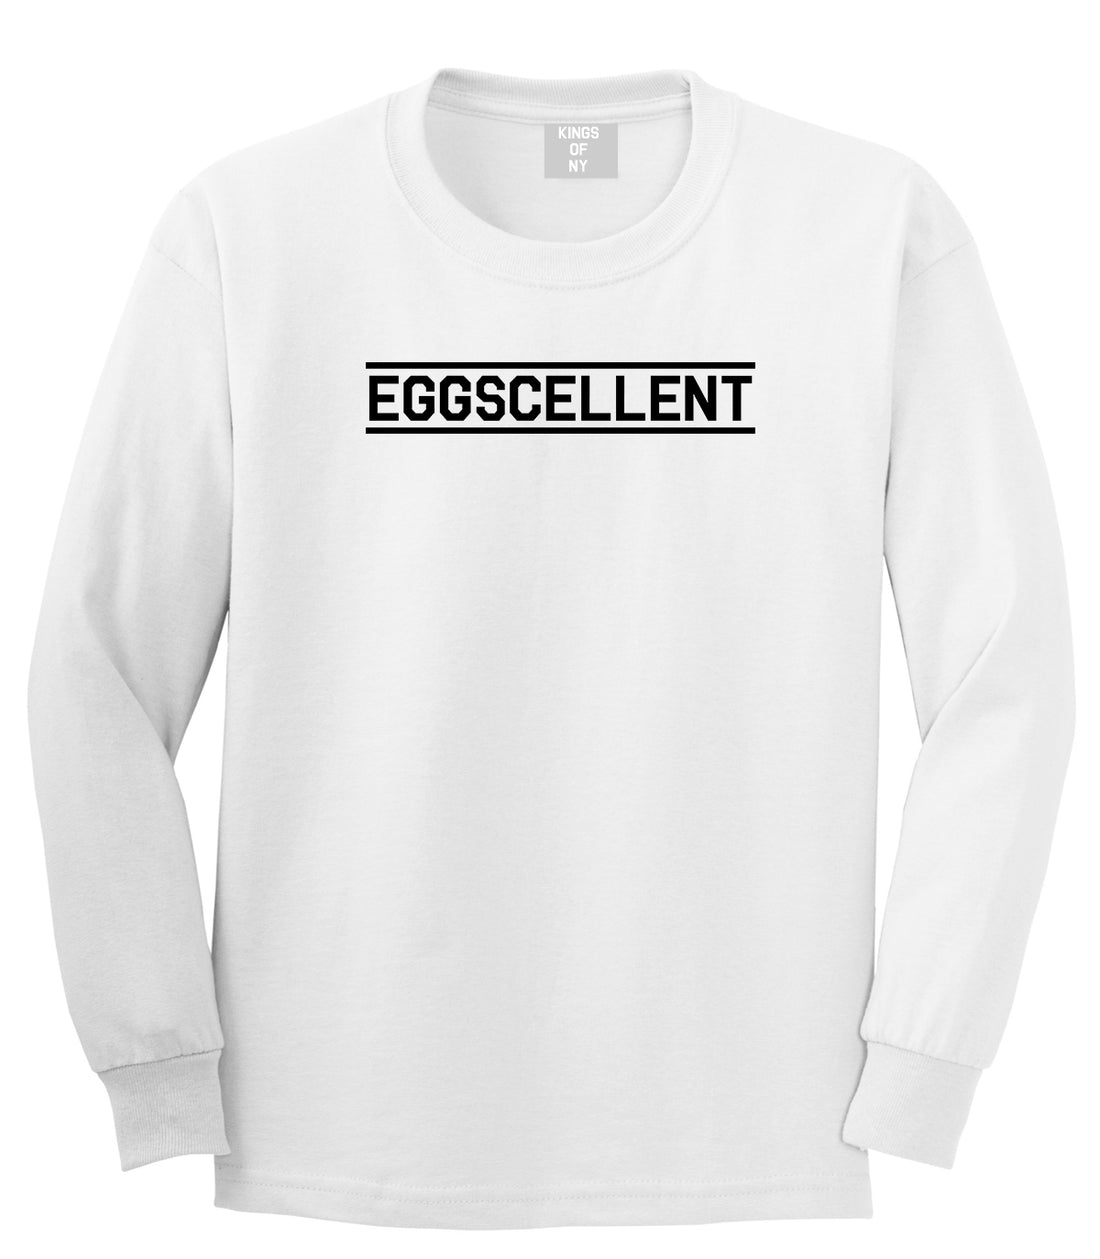 Eggscellent Funny Mens White Long Sleeve T-Shirt by Kings Of NY